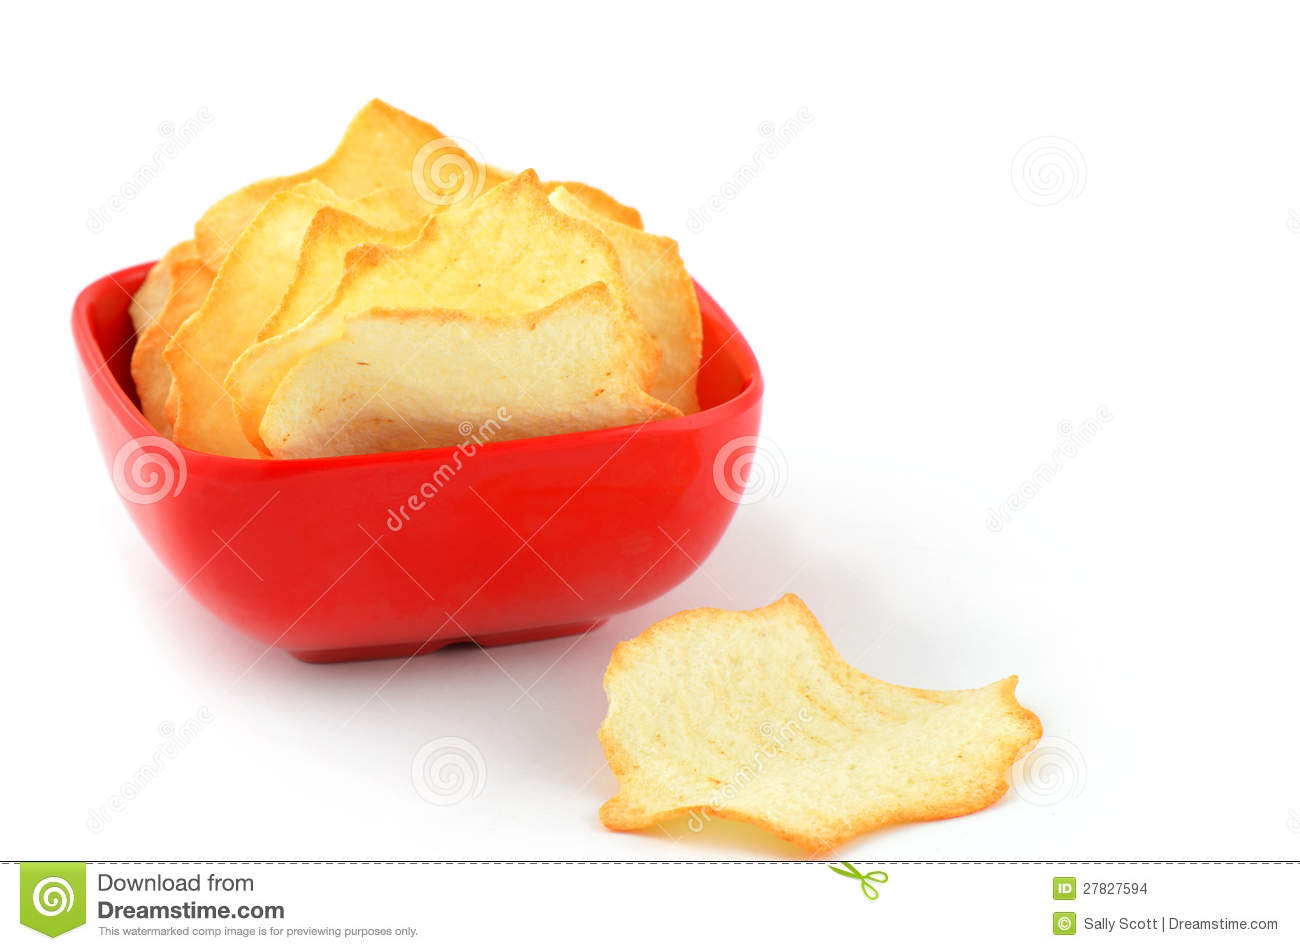 Healthy Low Fat Baked Potato Chips In Square Red Bowl Single Serving 